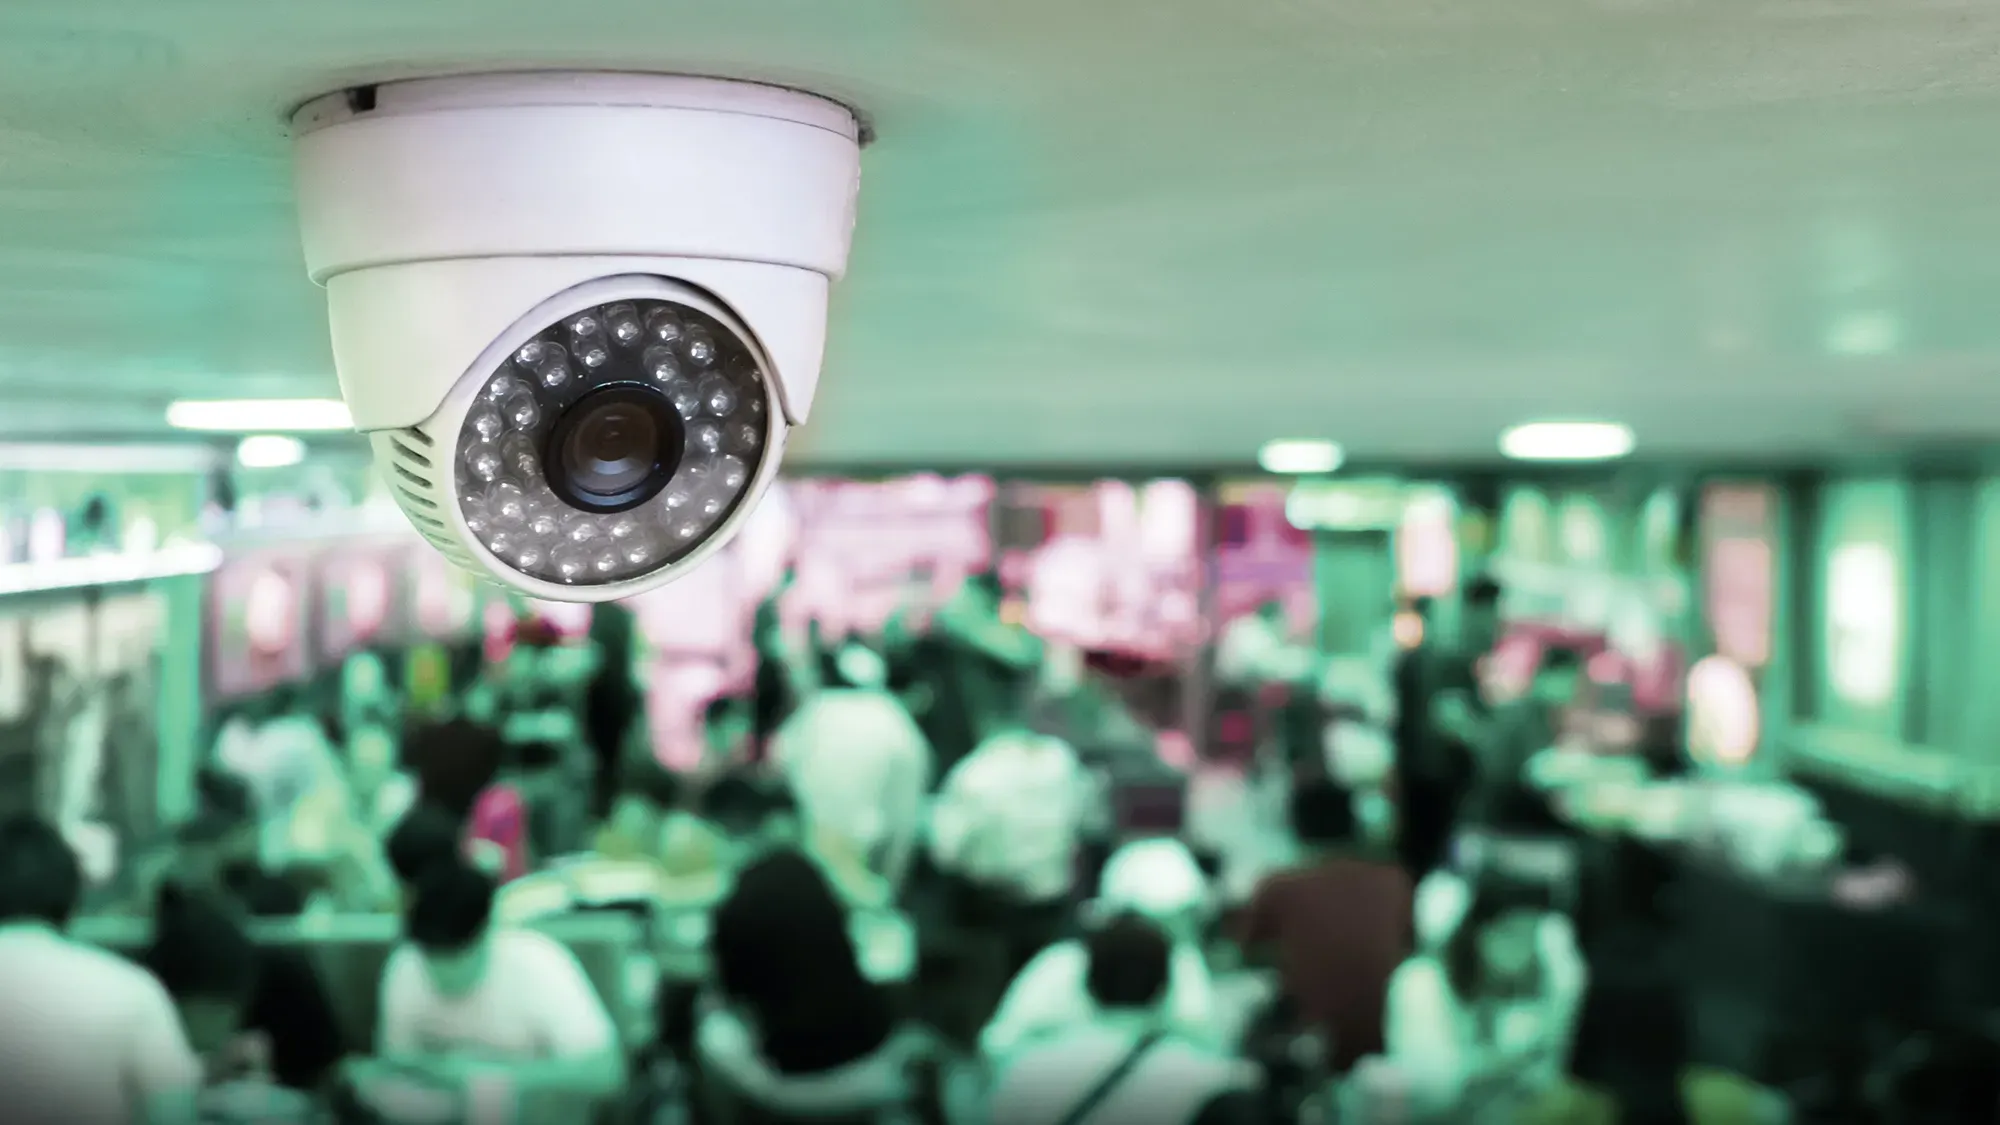 Should Companies Spy on Their Employees?